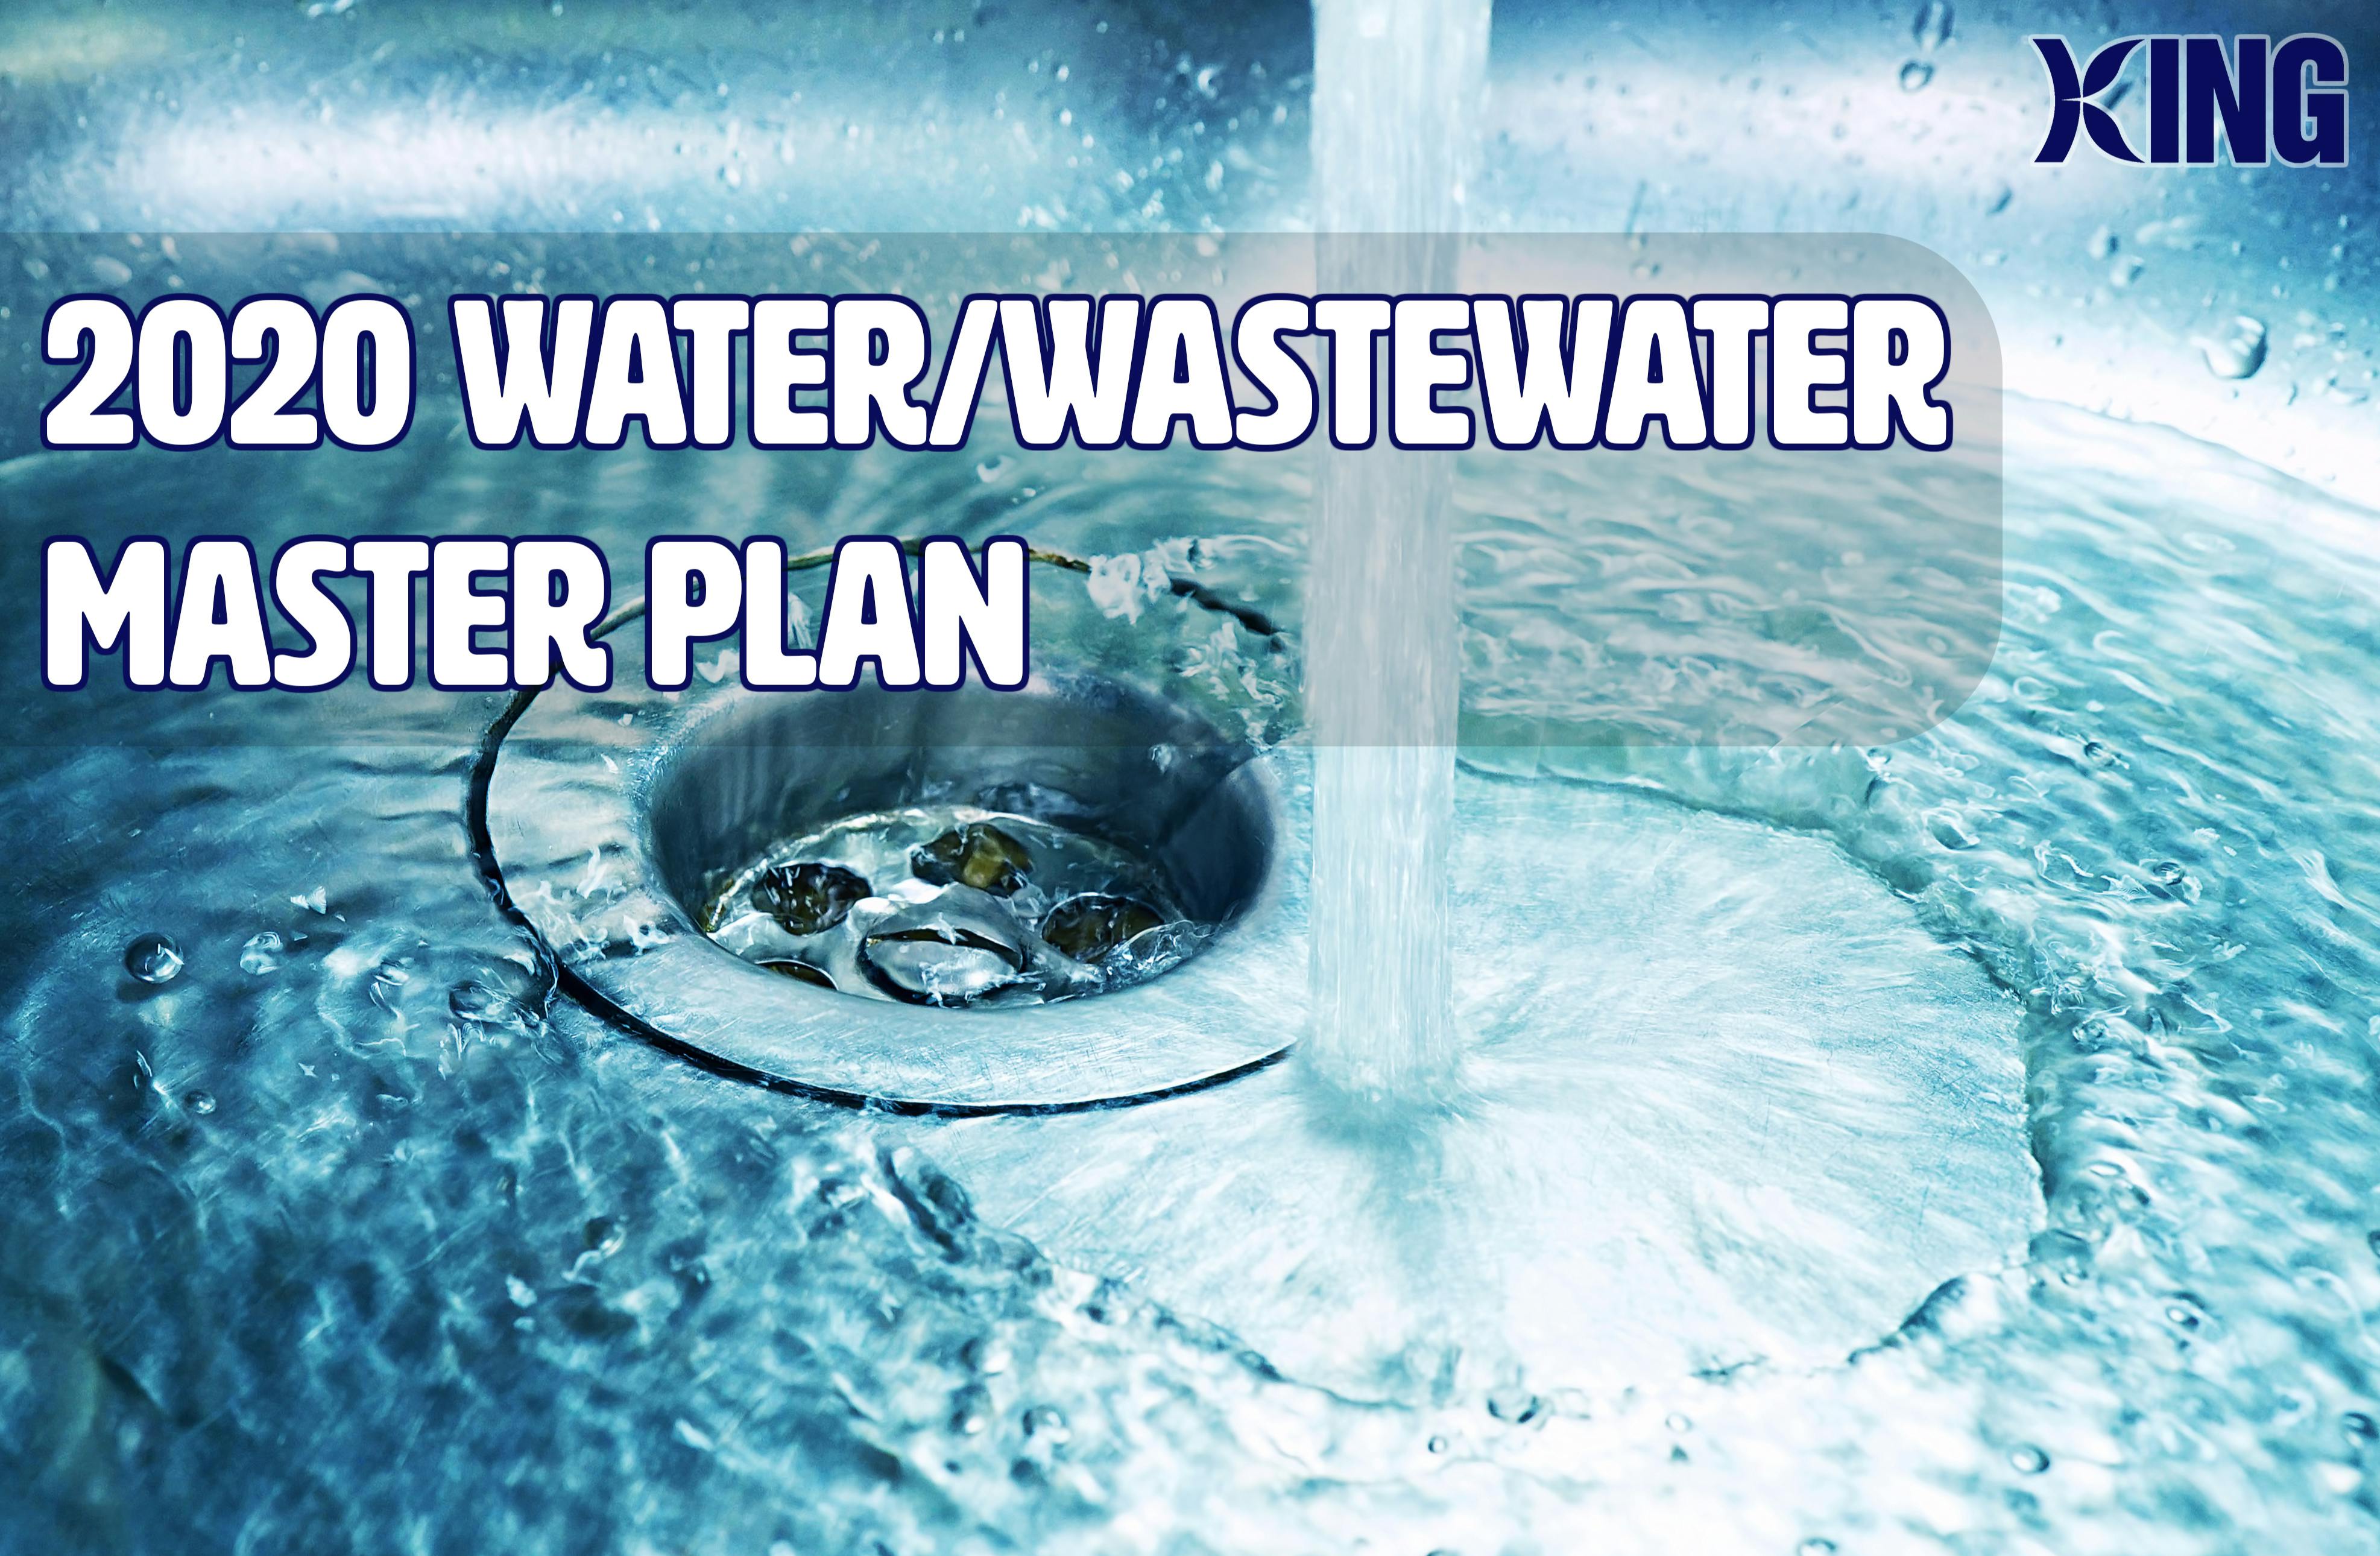 King Township's 2020 Water/Wastewater Master Plan Public Consultation Centre